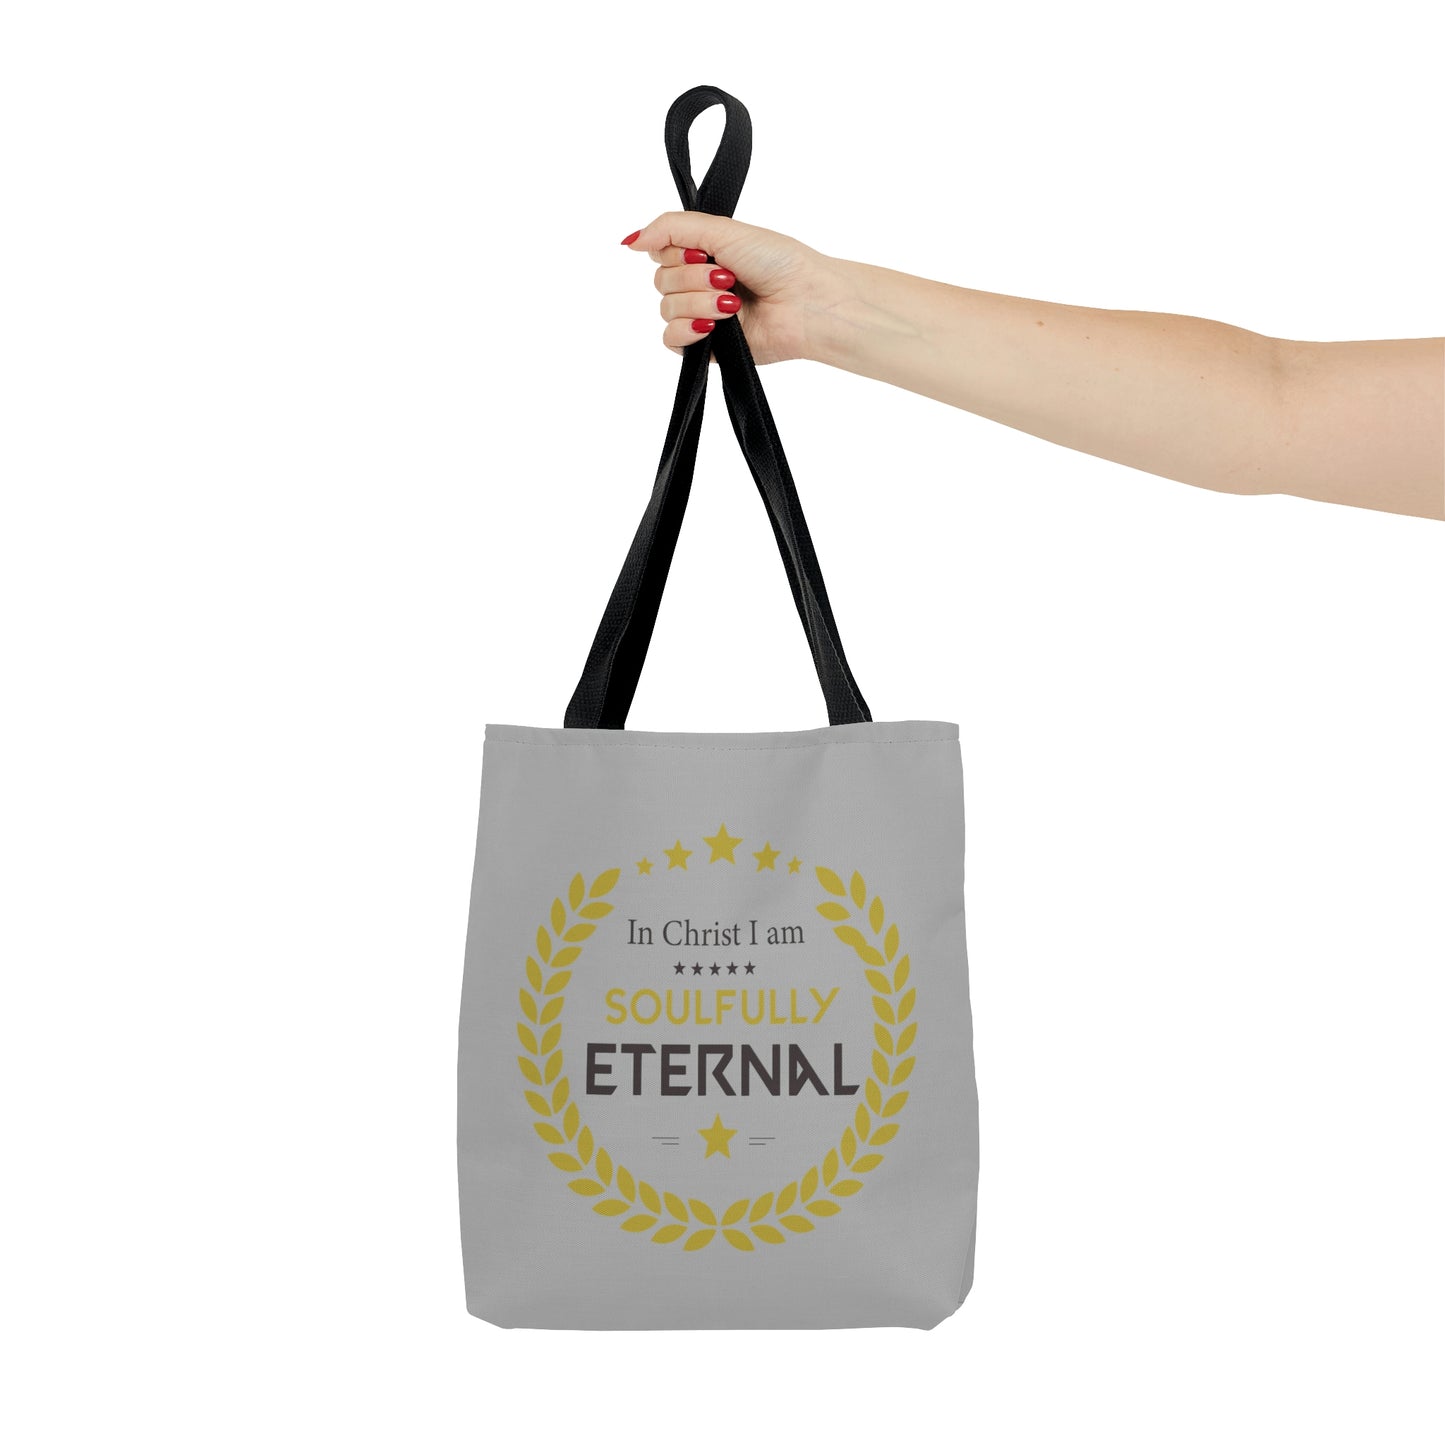 In Christ I Am Soulfully Eternal Tote Bag